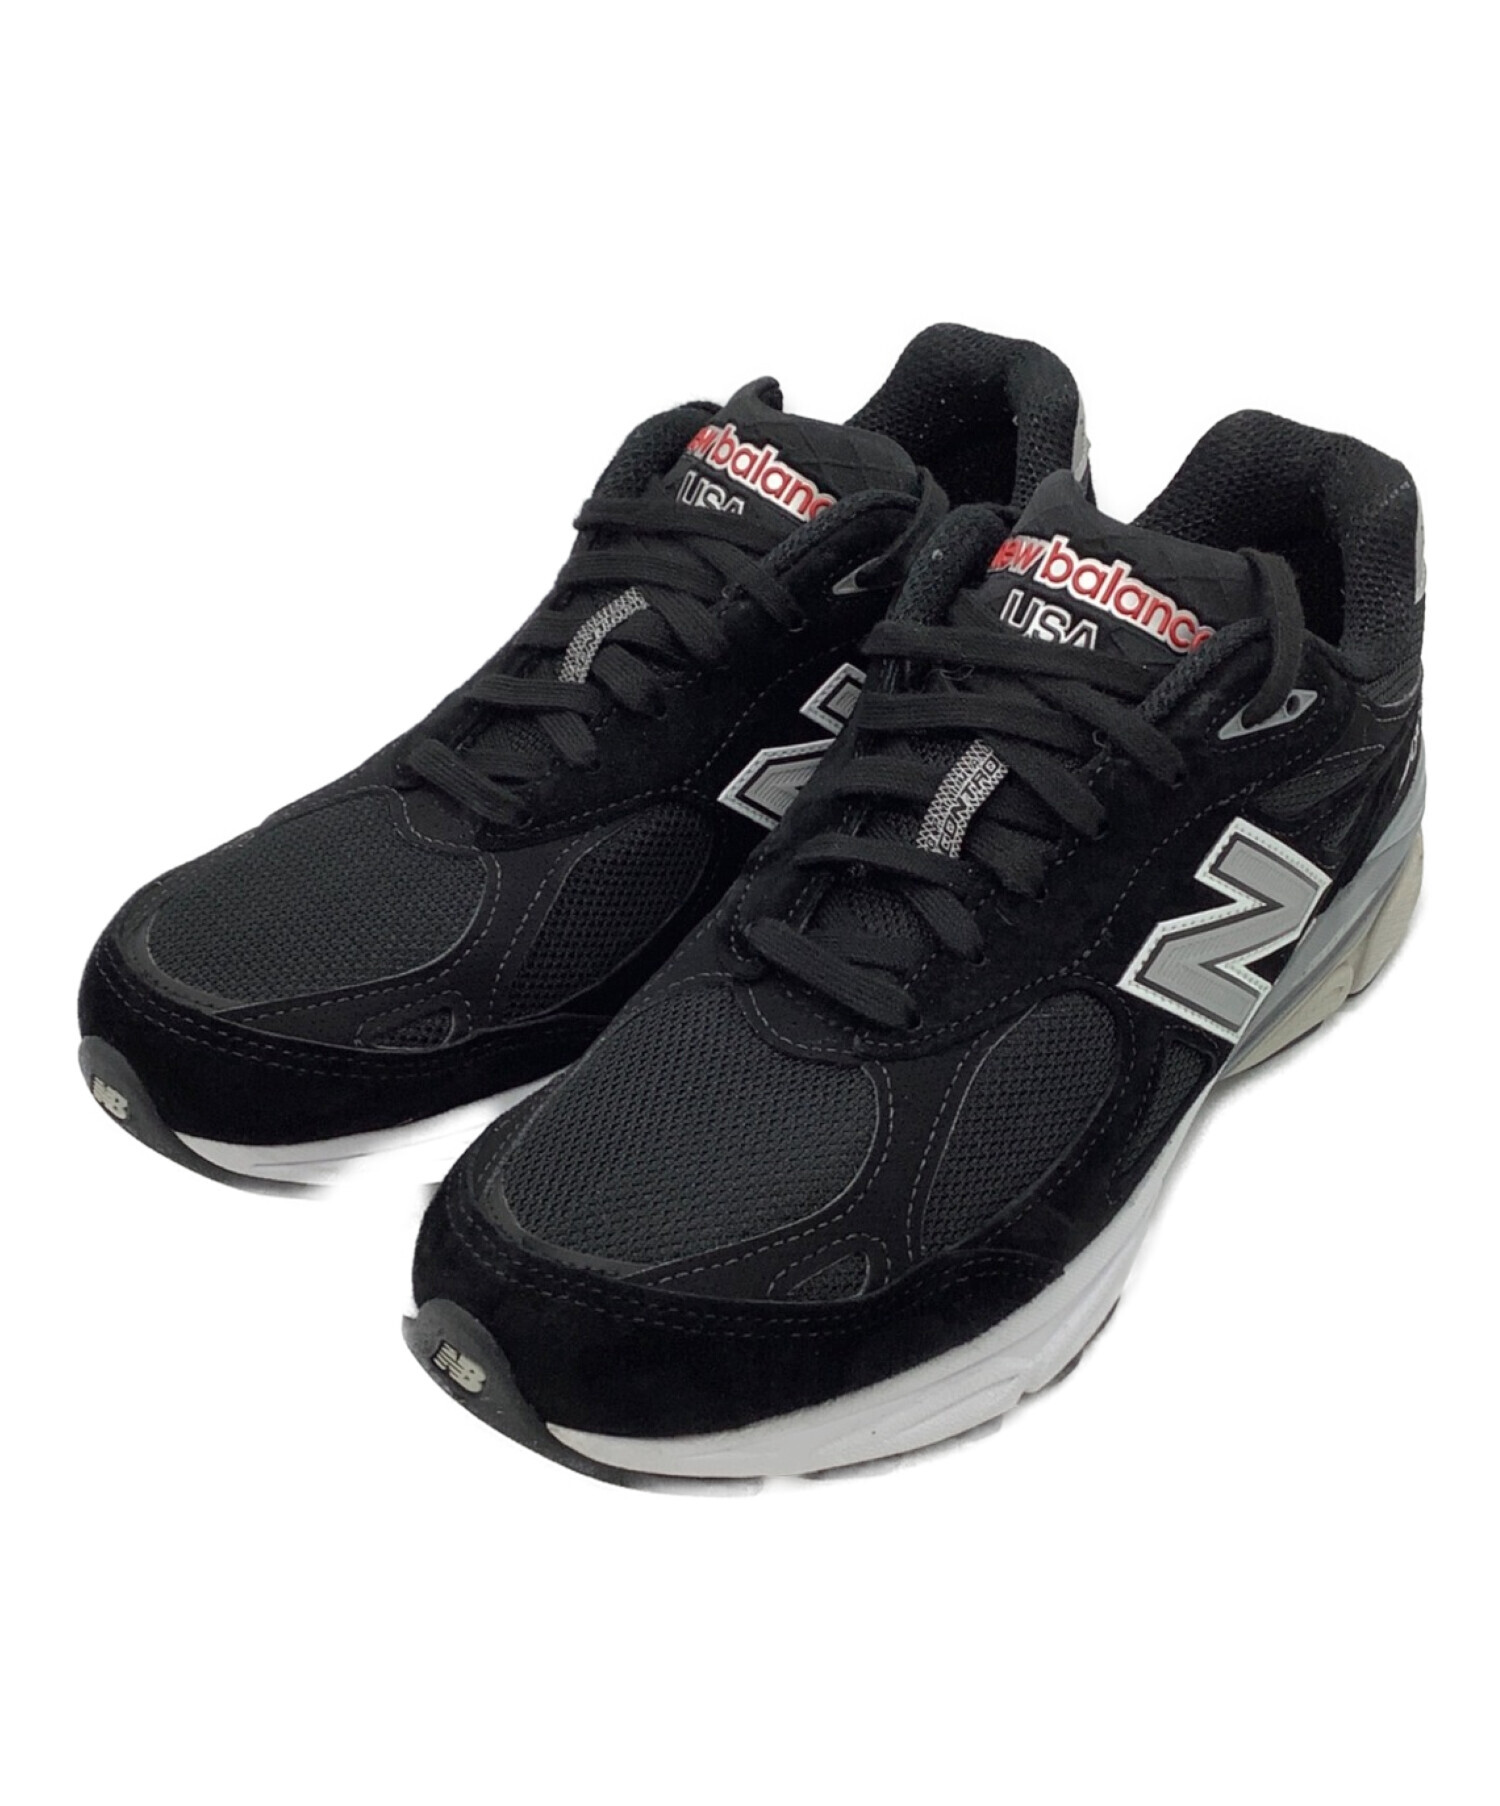 NEW BALANCE 990v3 M990BS3「Made in U.S.A」スニーカー